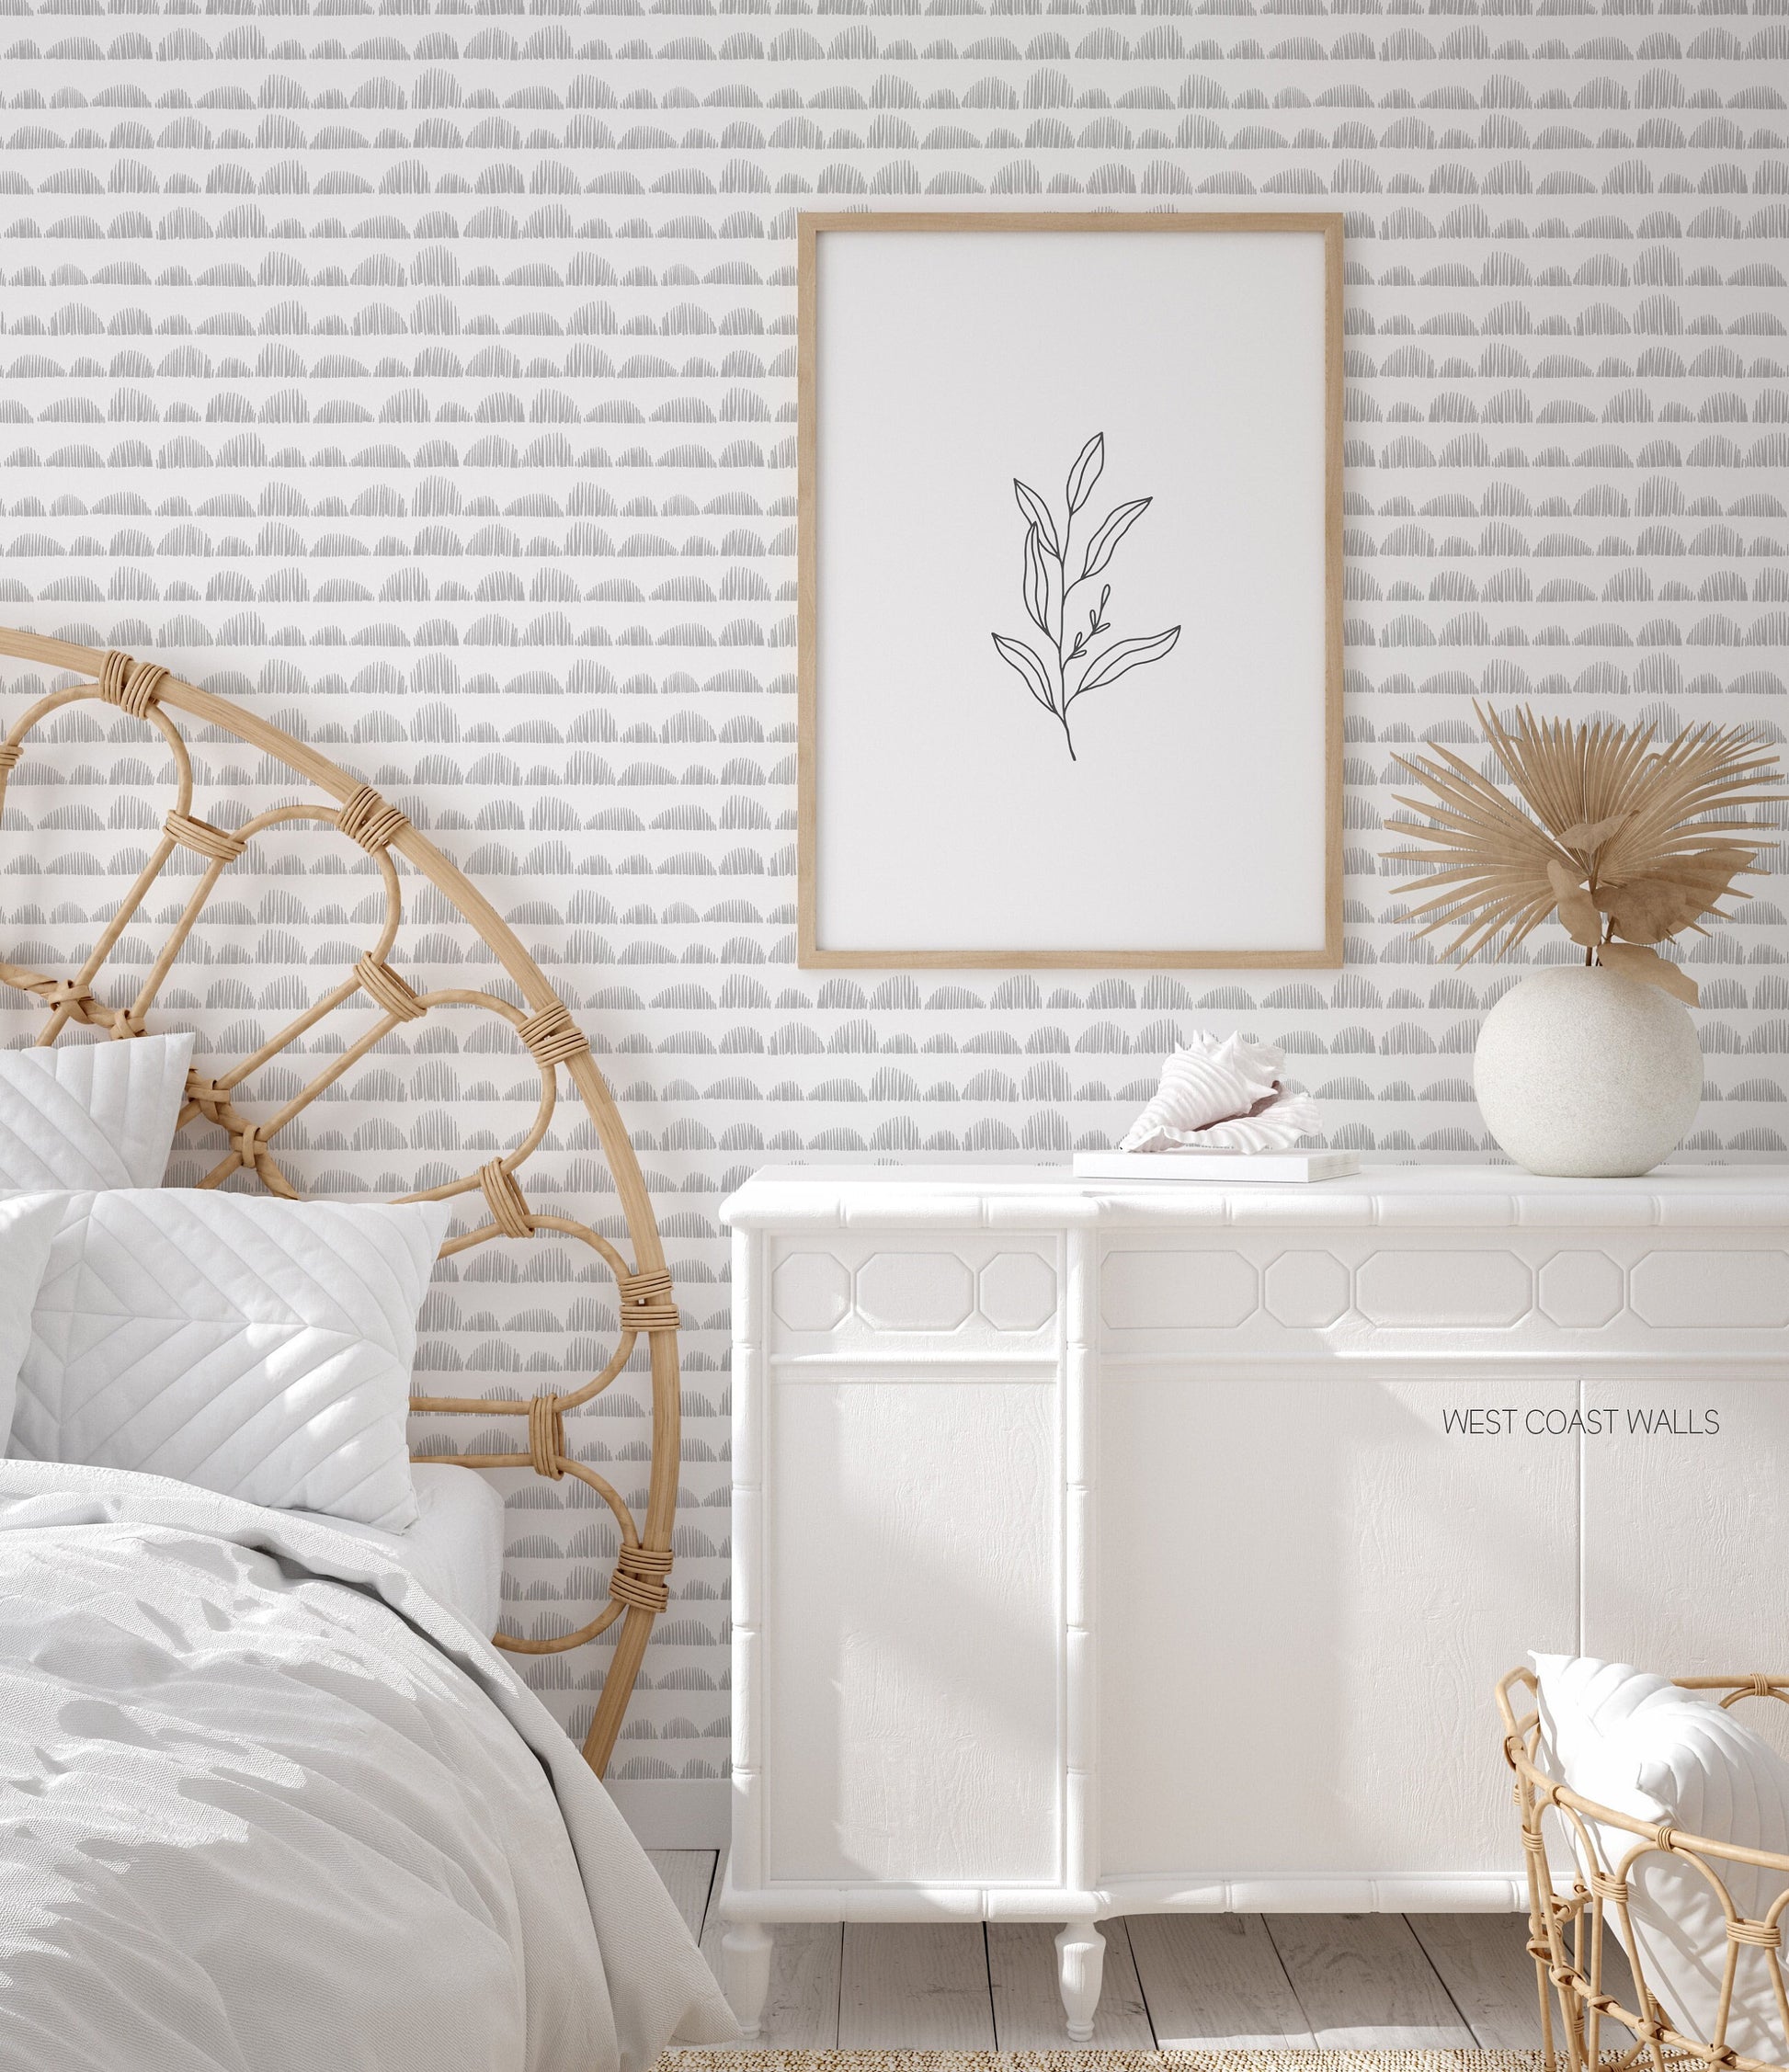 Scalloped Lines Wallpaper